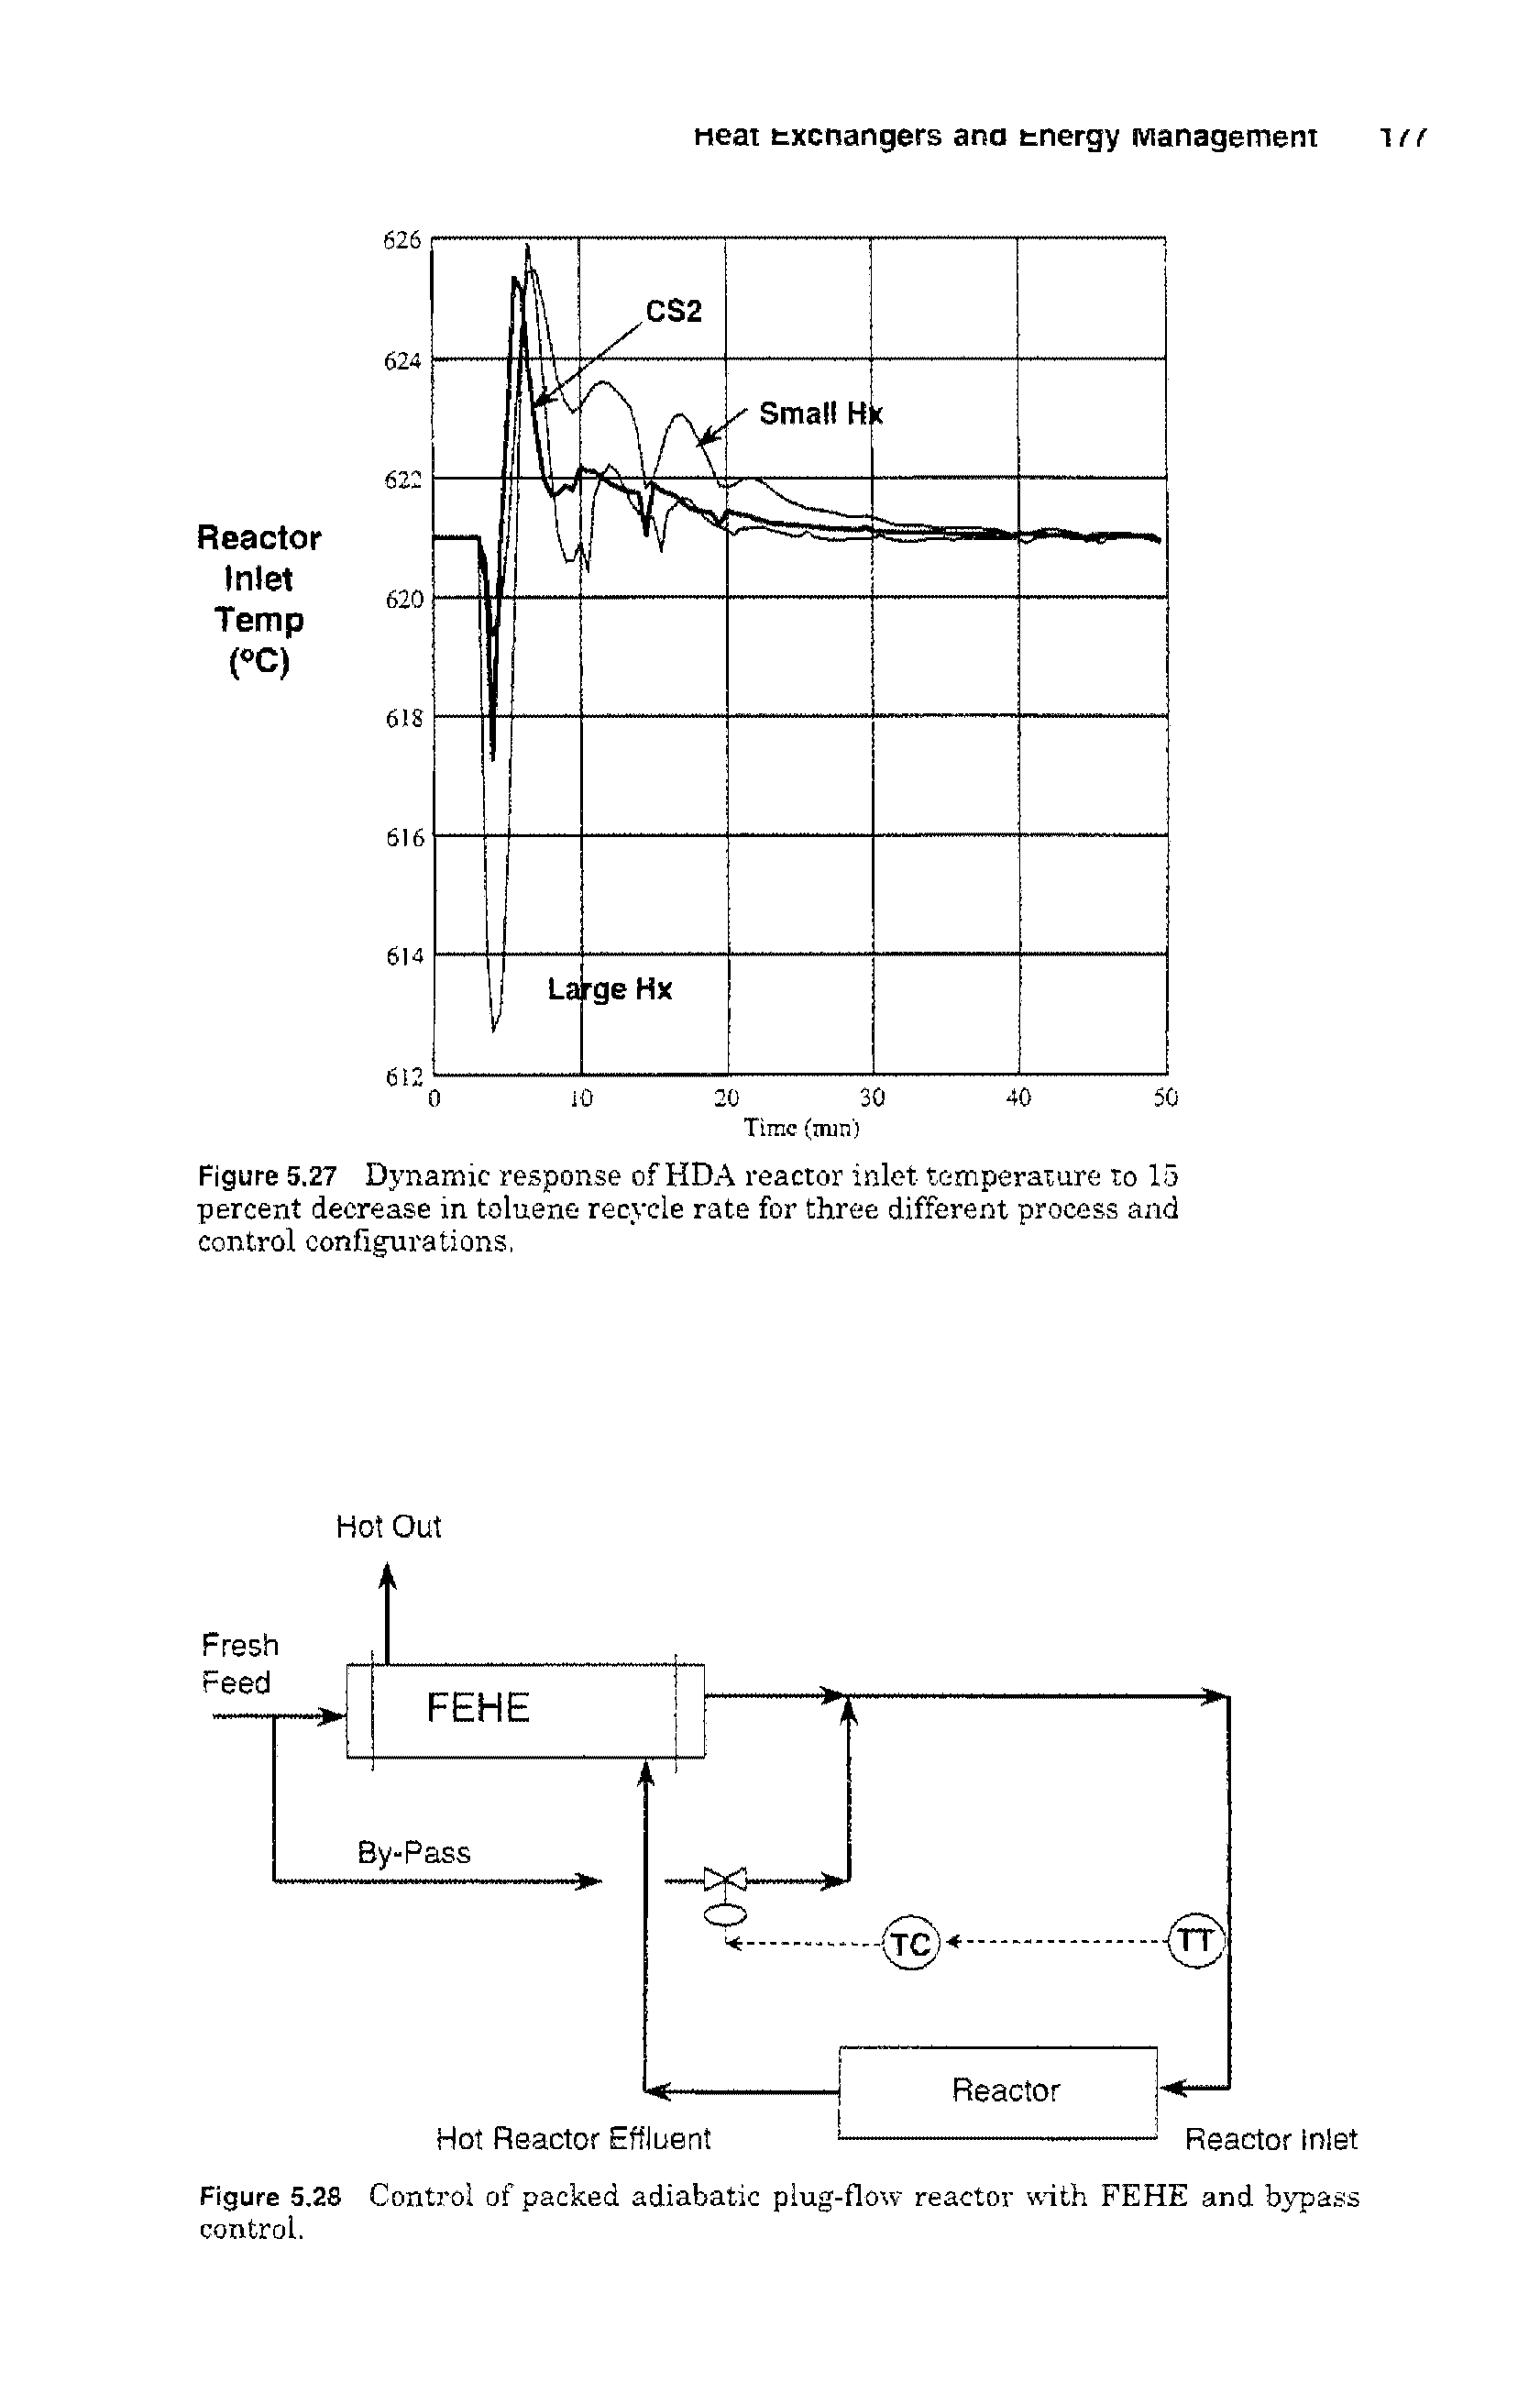 Figure 5.2S Control of packed adiabatic plug-flow reactor with FEHE and bypass control.